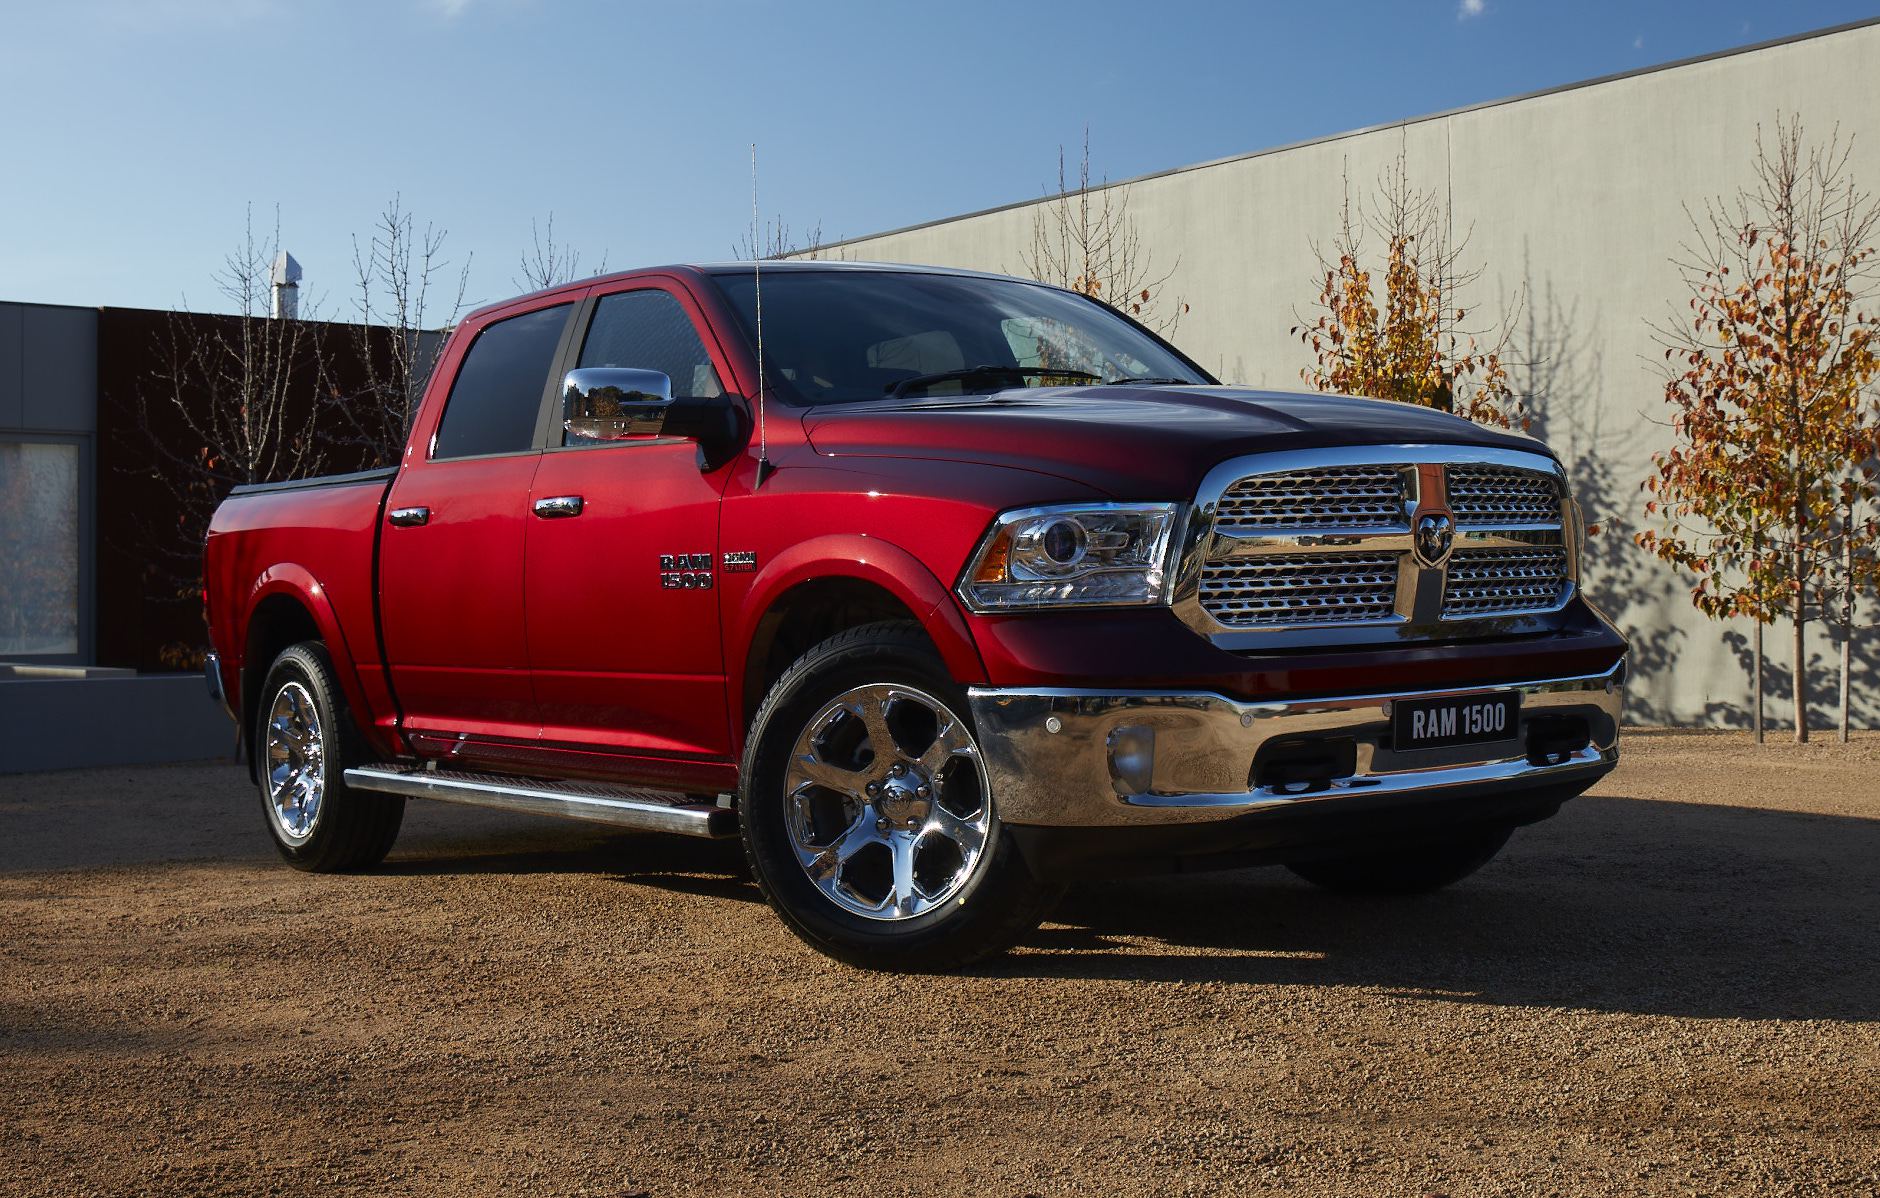 News - 2018 RAM 1500 Touches Down In AU, Starting Just ...